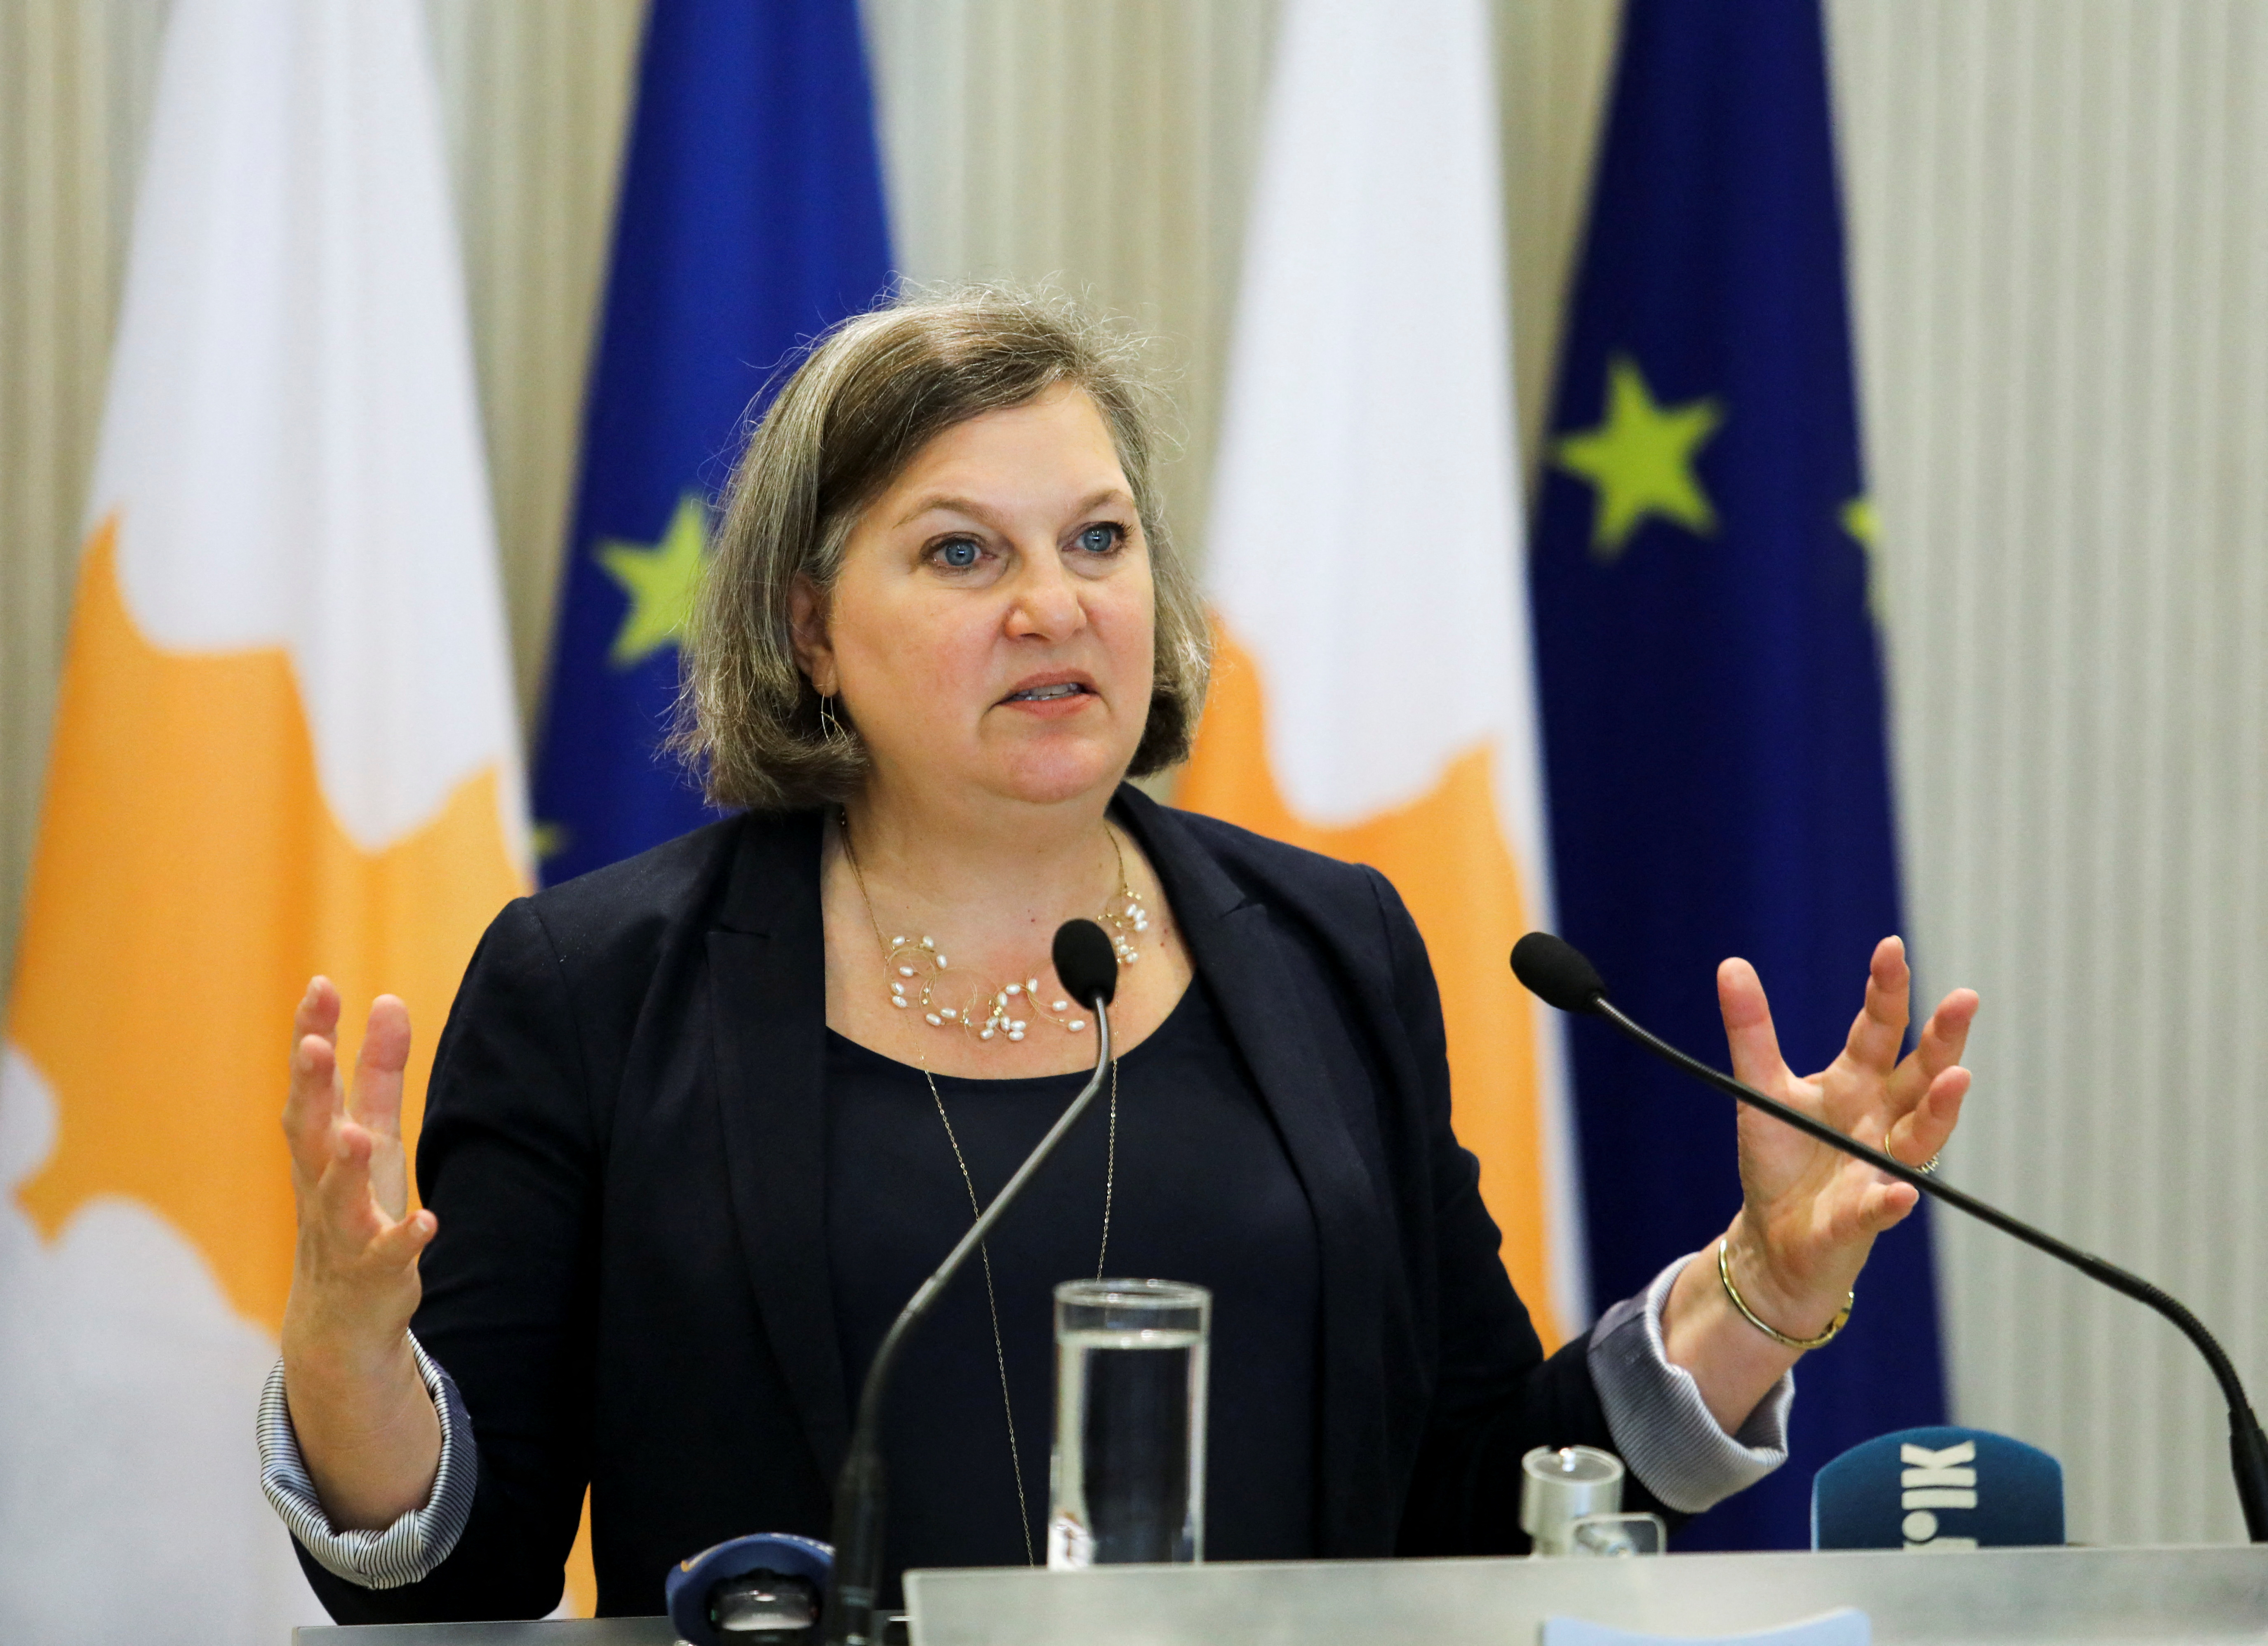 U.S. State Department Under Secretary for Public Affairs Victoria Nuland attends a news conference at the Presidential Palace in Nicosia